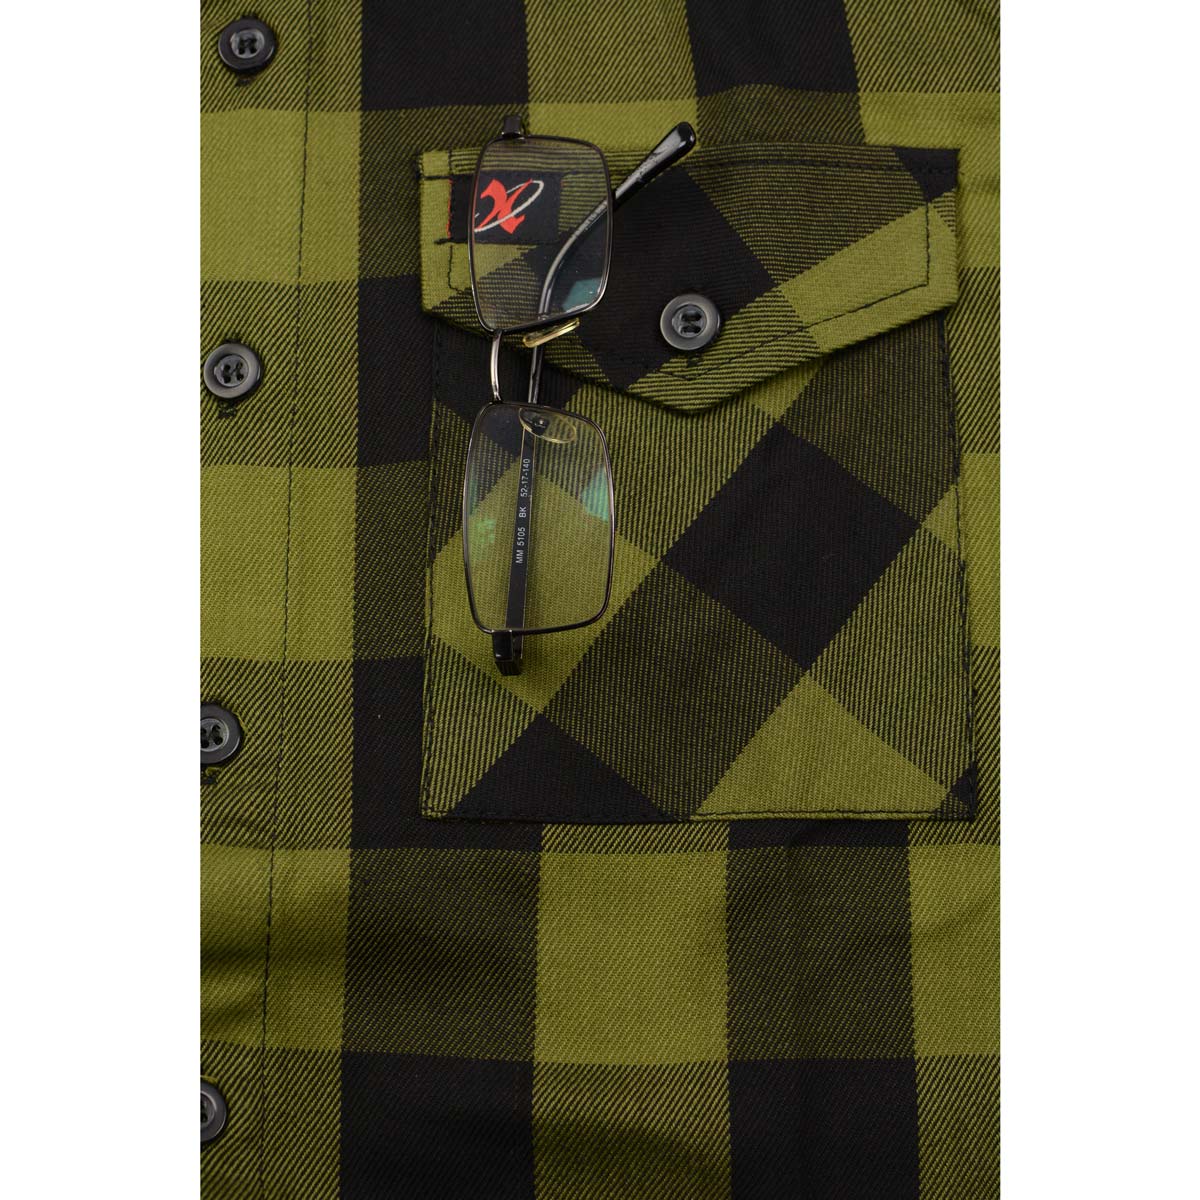 Milwaukee Leather MNG11668 Men's Black and Green Long Sleeve Cotton Flannel Shirt